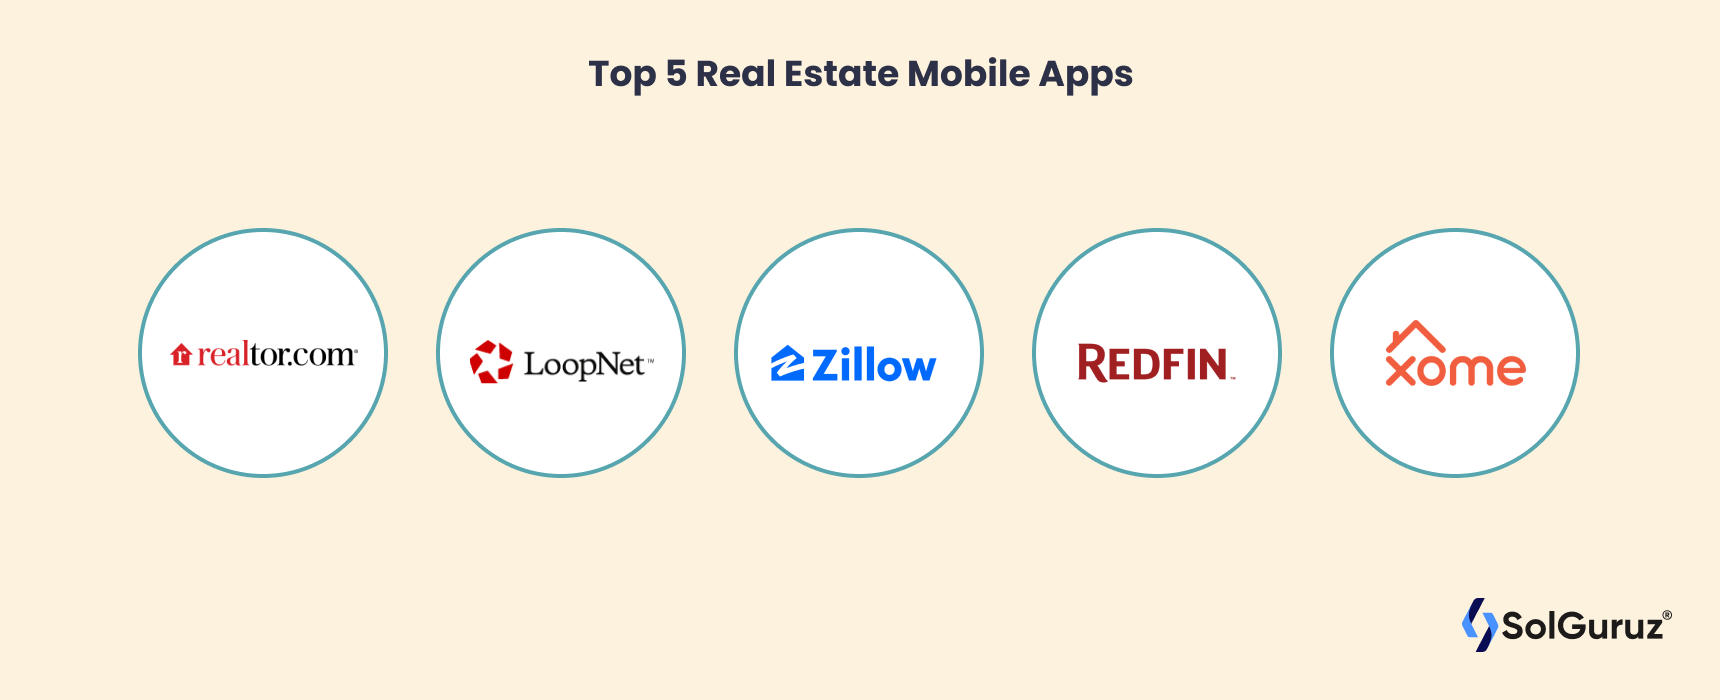 Top 5 Real Estate Mobile Apps